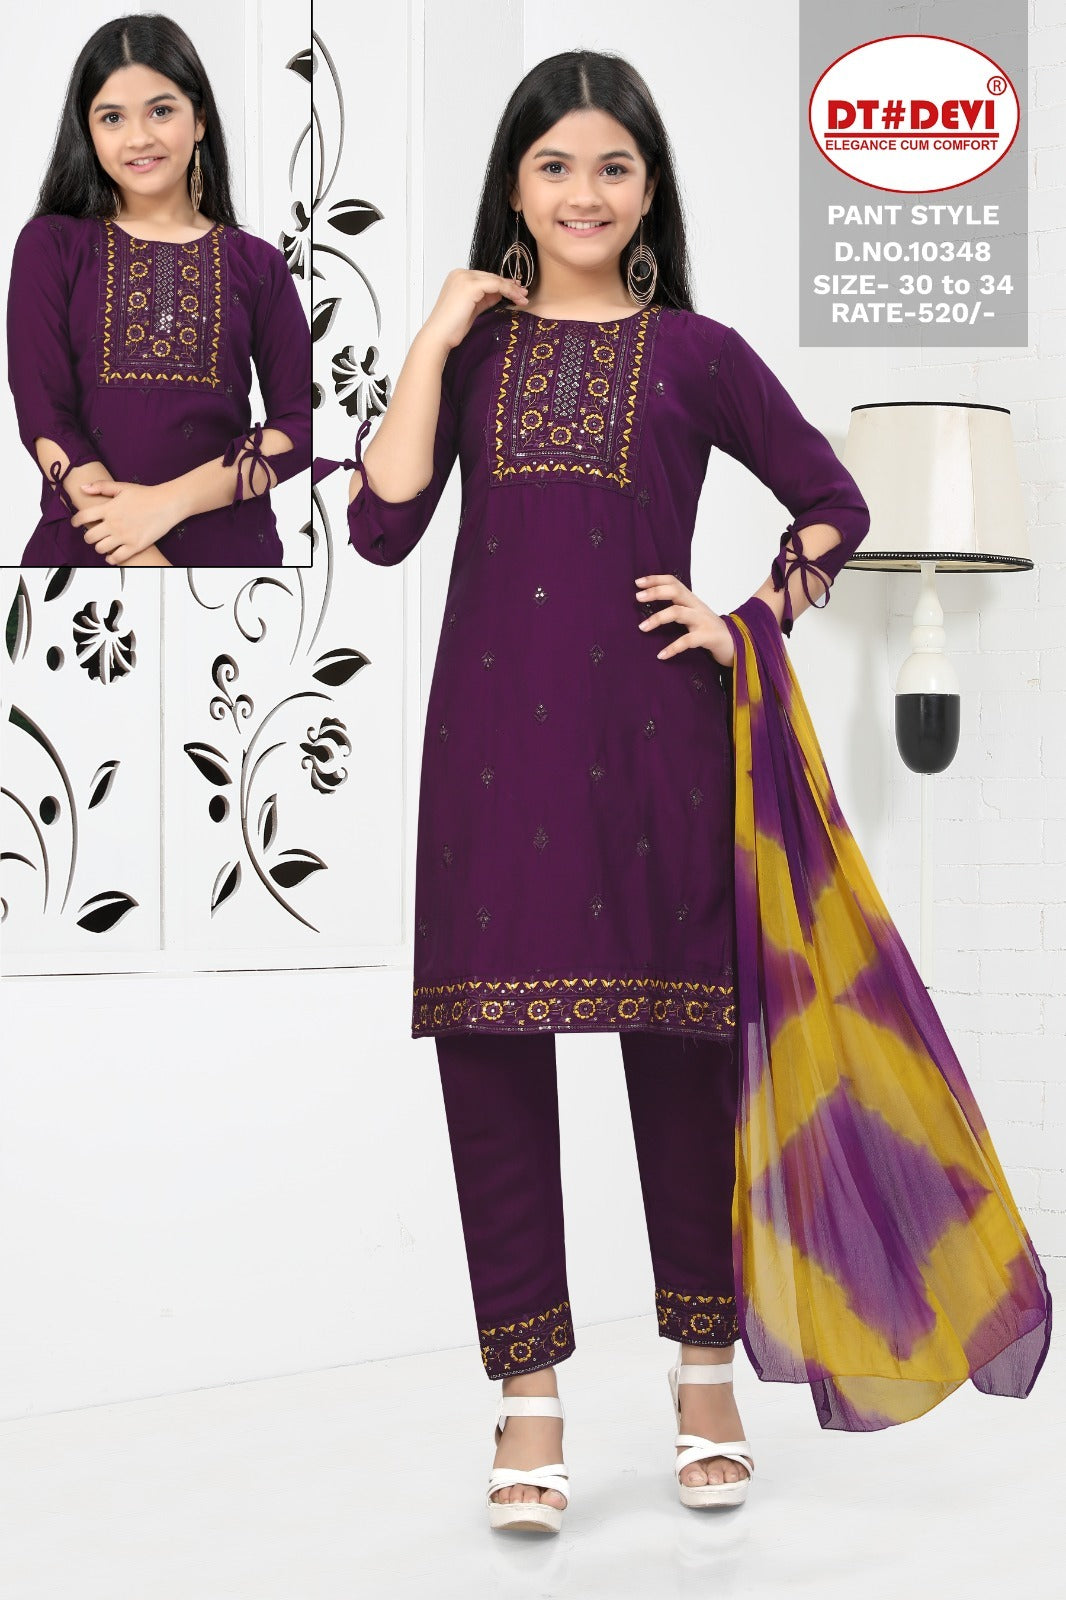 10348 Dt Devi Silk Girls Readymade Pant Suits